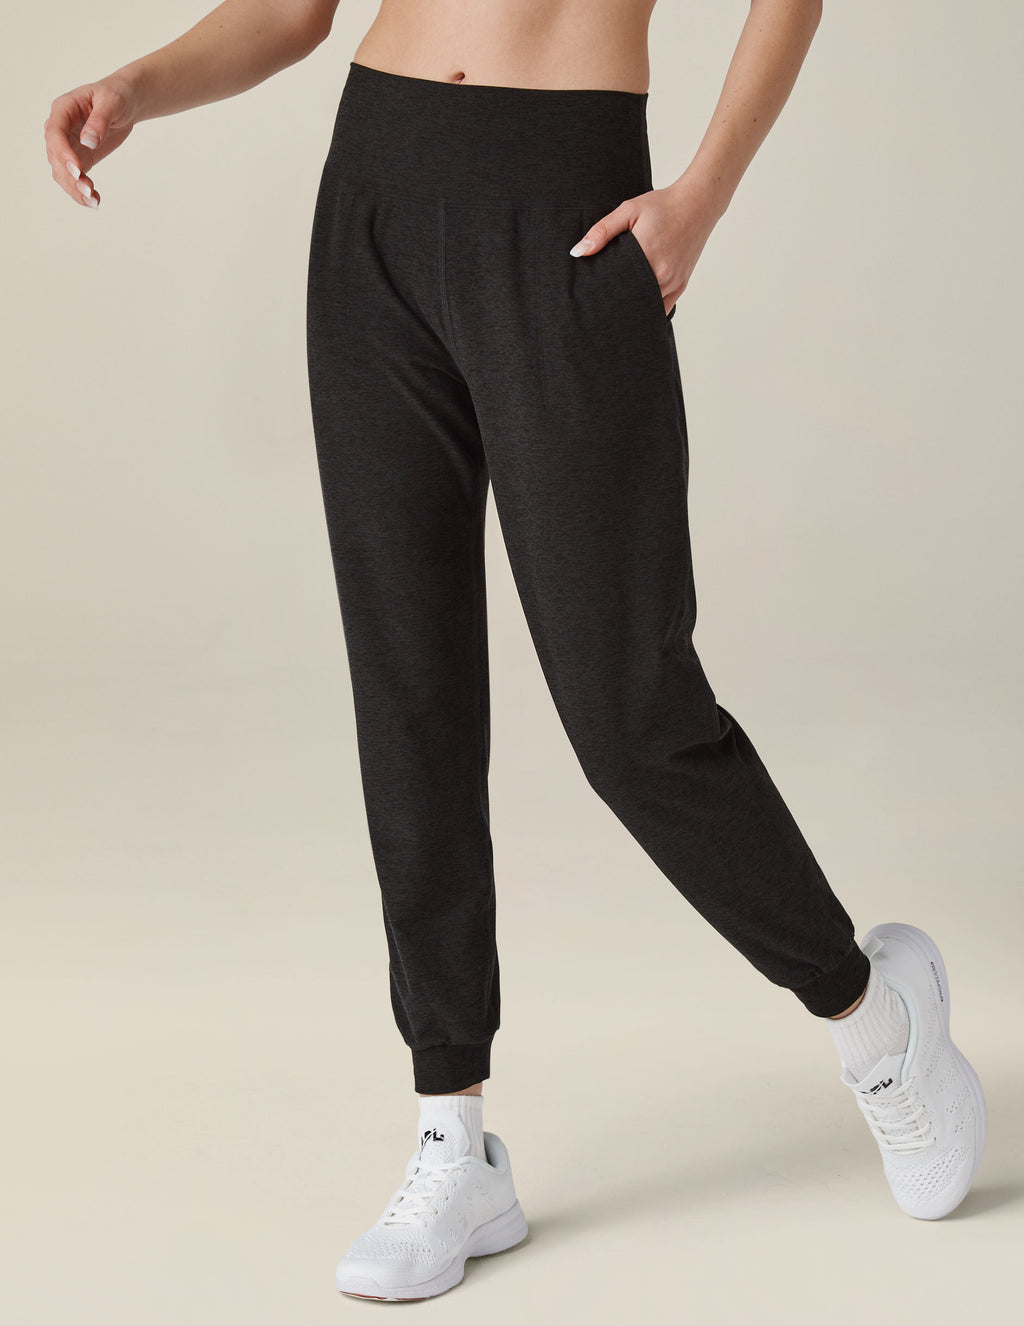 Pants Made From Performance Fabric